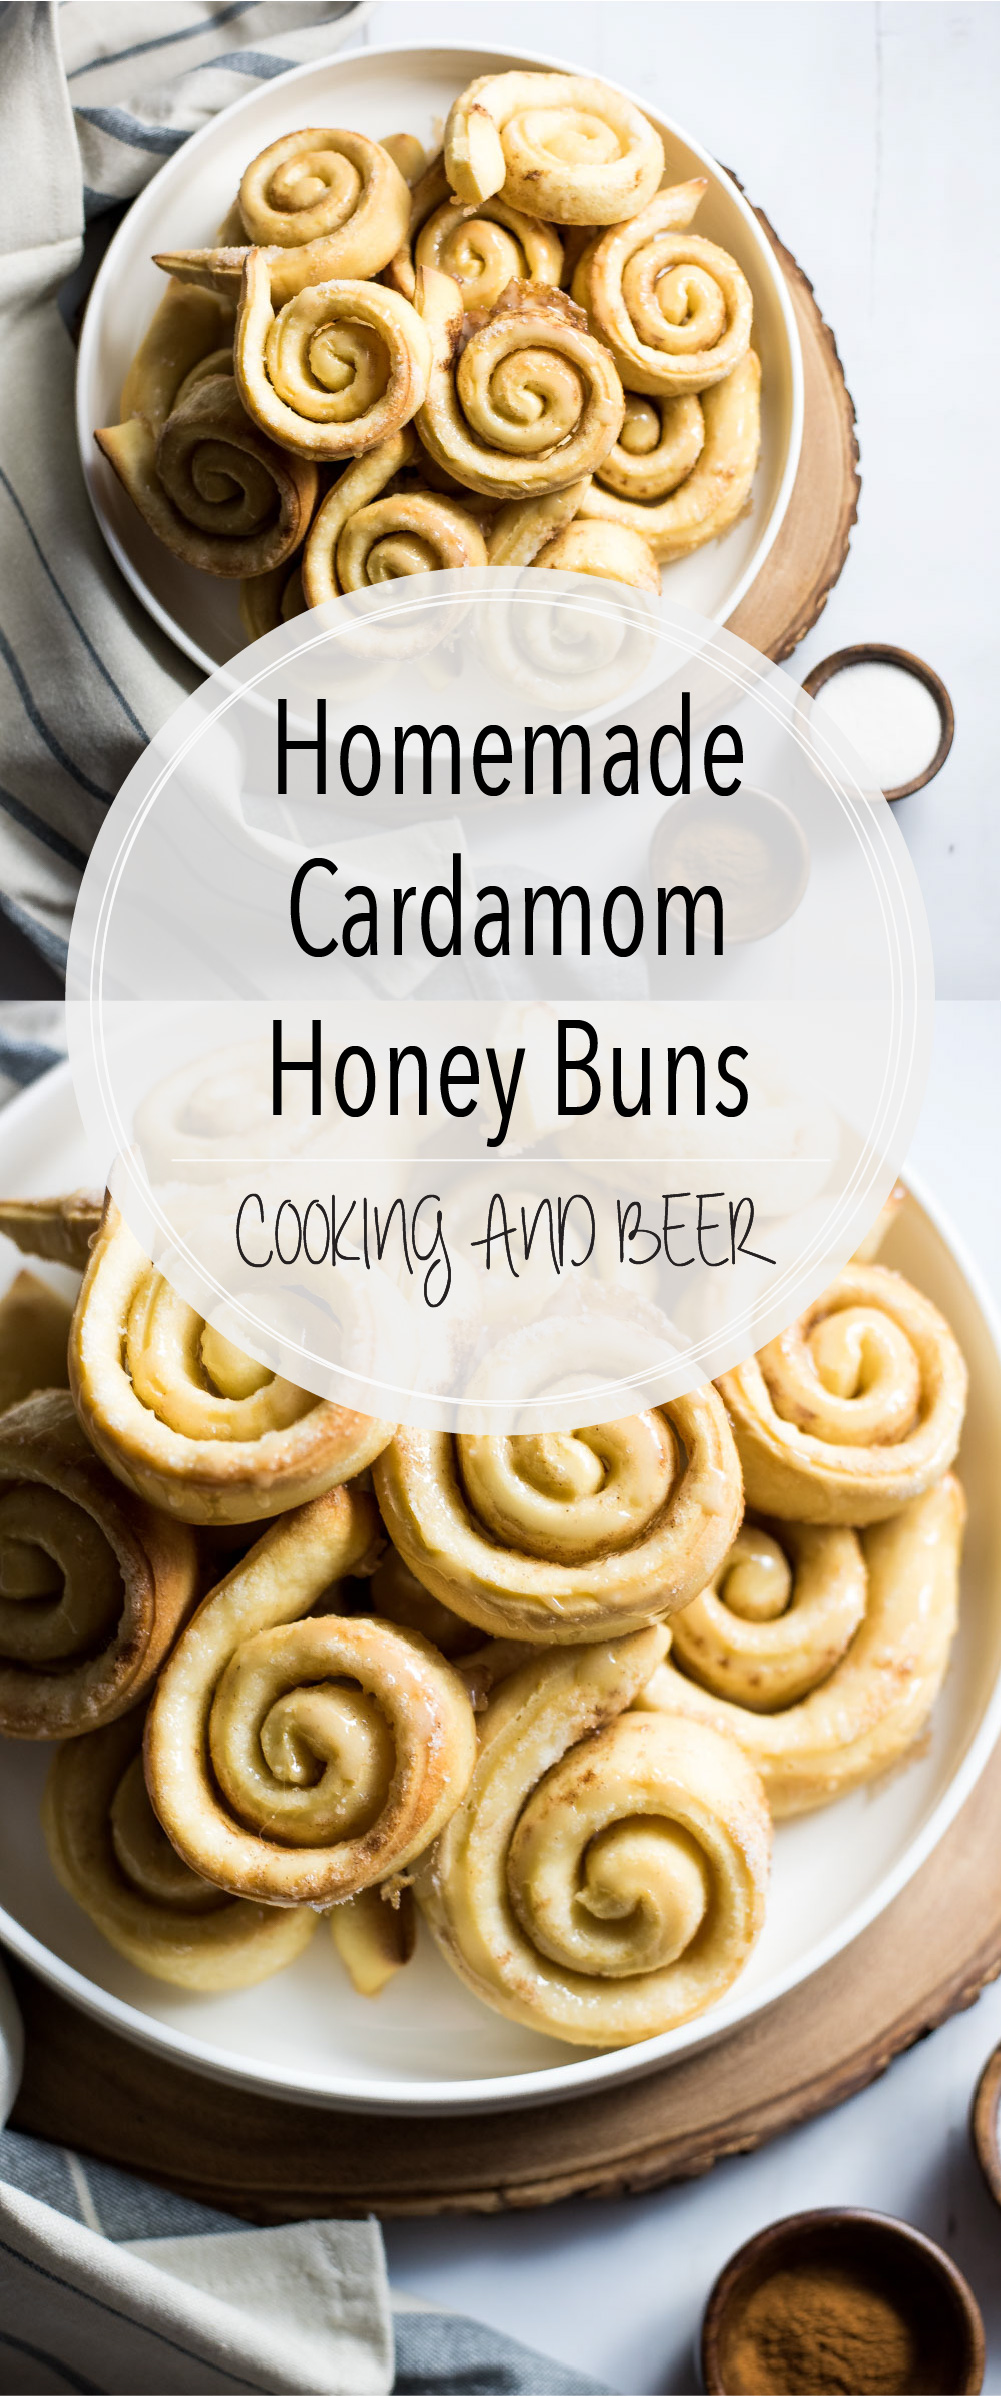 If you are a lover of homemade honey buns and love big and bold spices, these homemade cardamom honey buns are what you need for a relaxing Sunday morning!